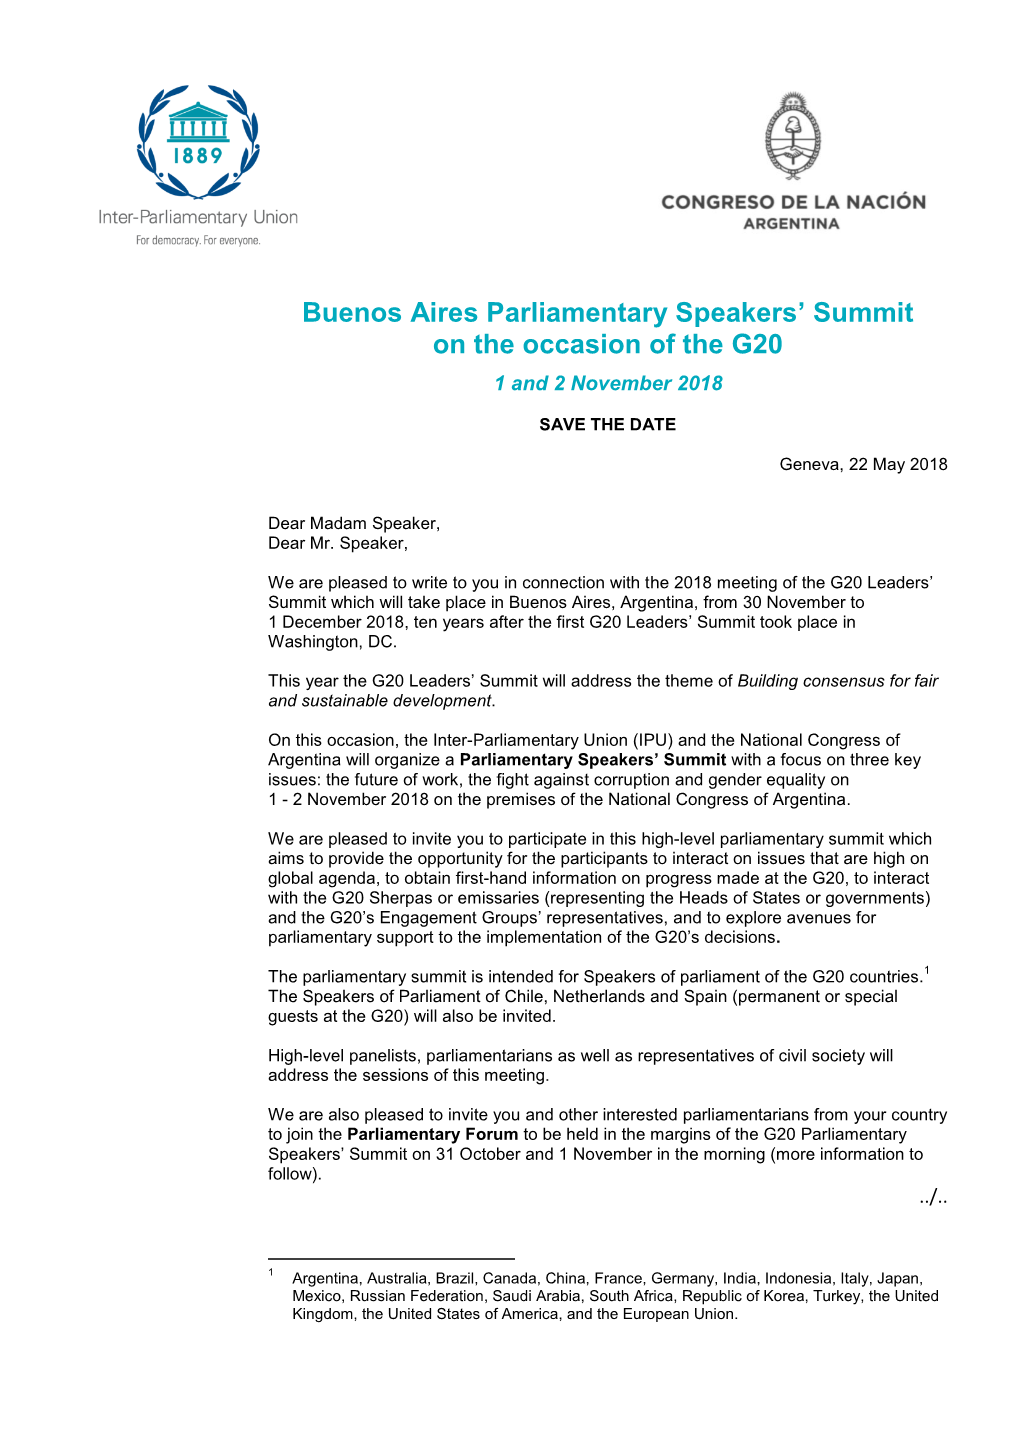 Buenos Aires Parliamentary Speakers' Summit on the Occasion of The